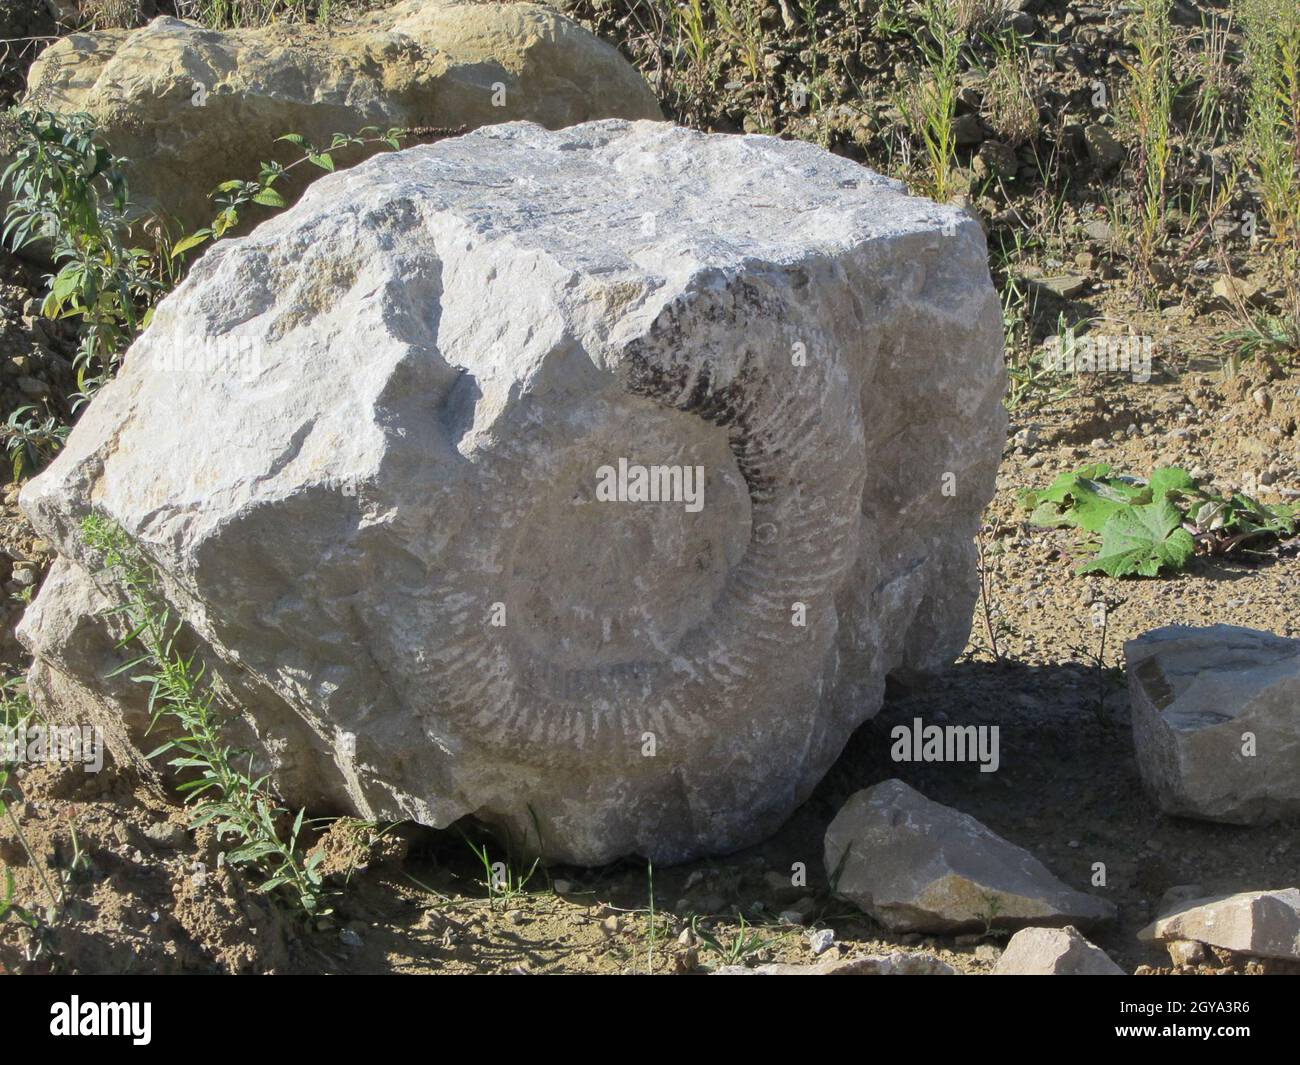 Closeup of an ammonite fossil rock outdoors during daylight Stock Photo